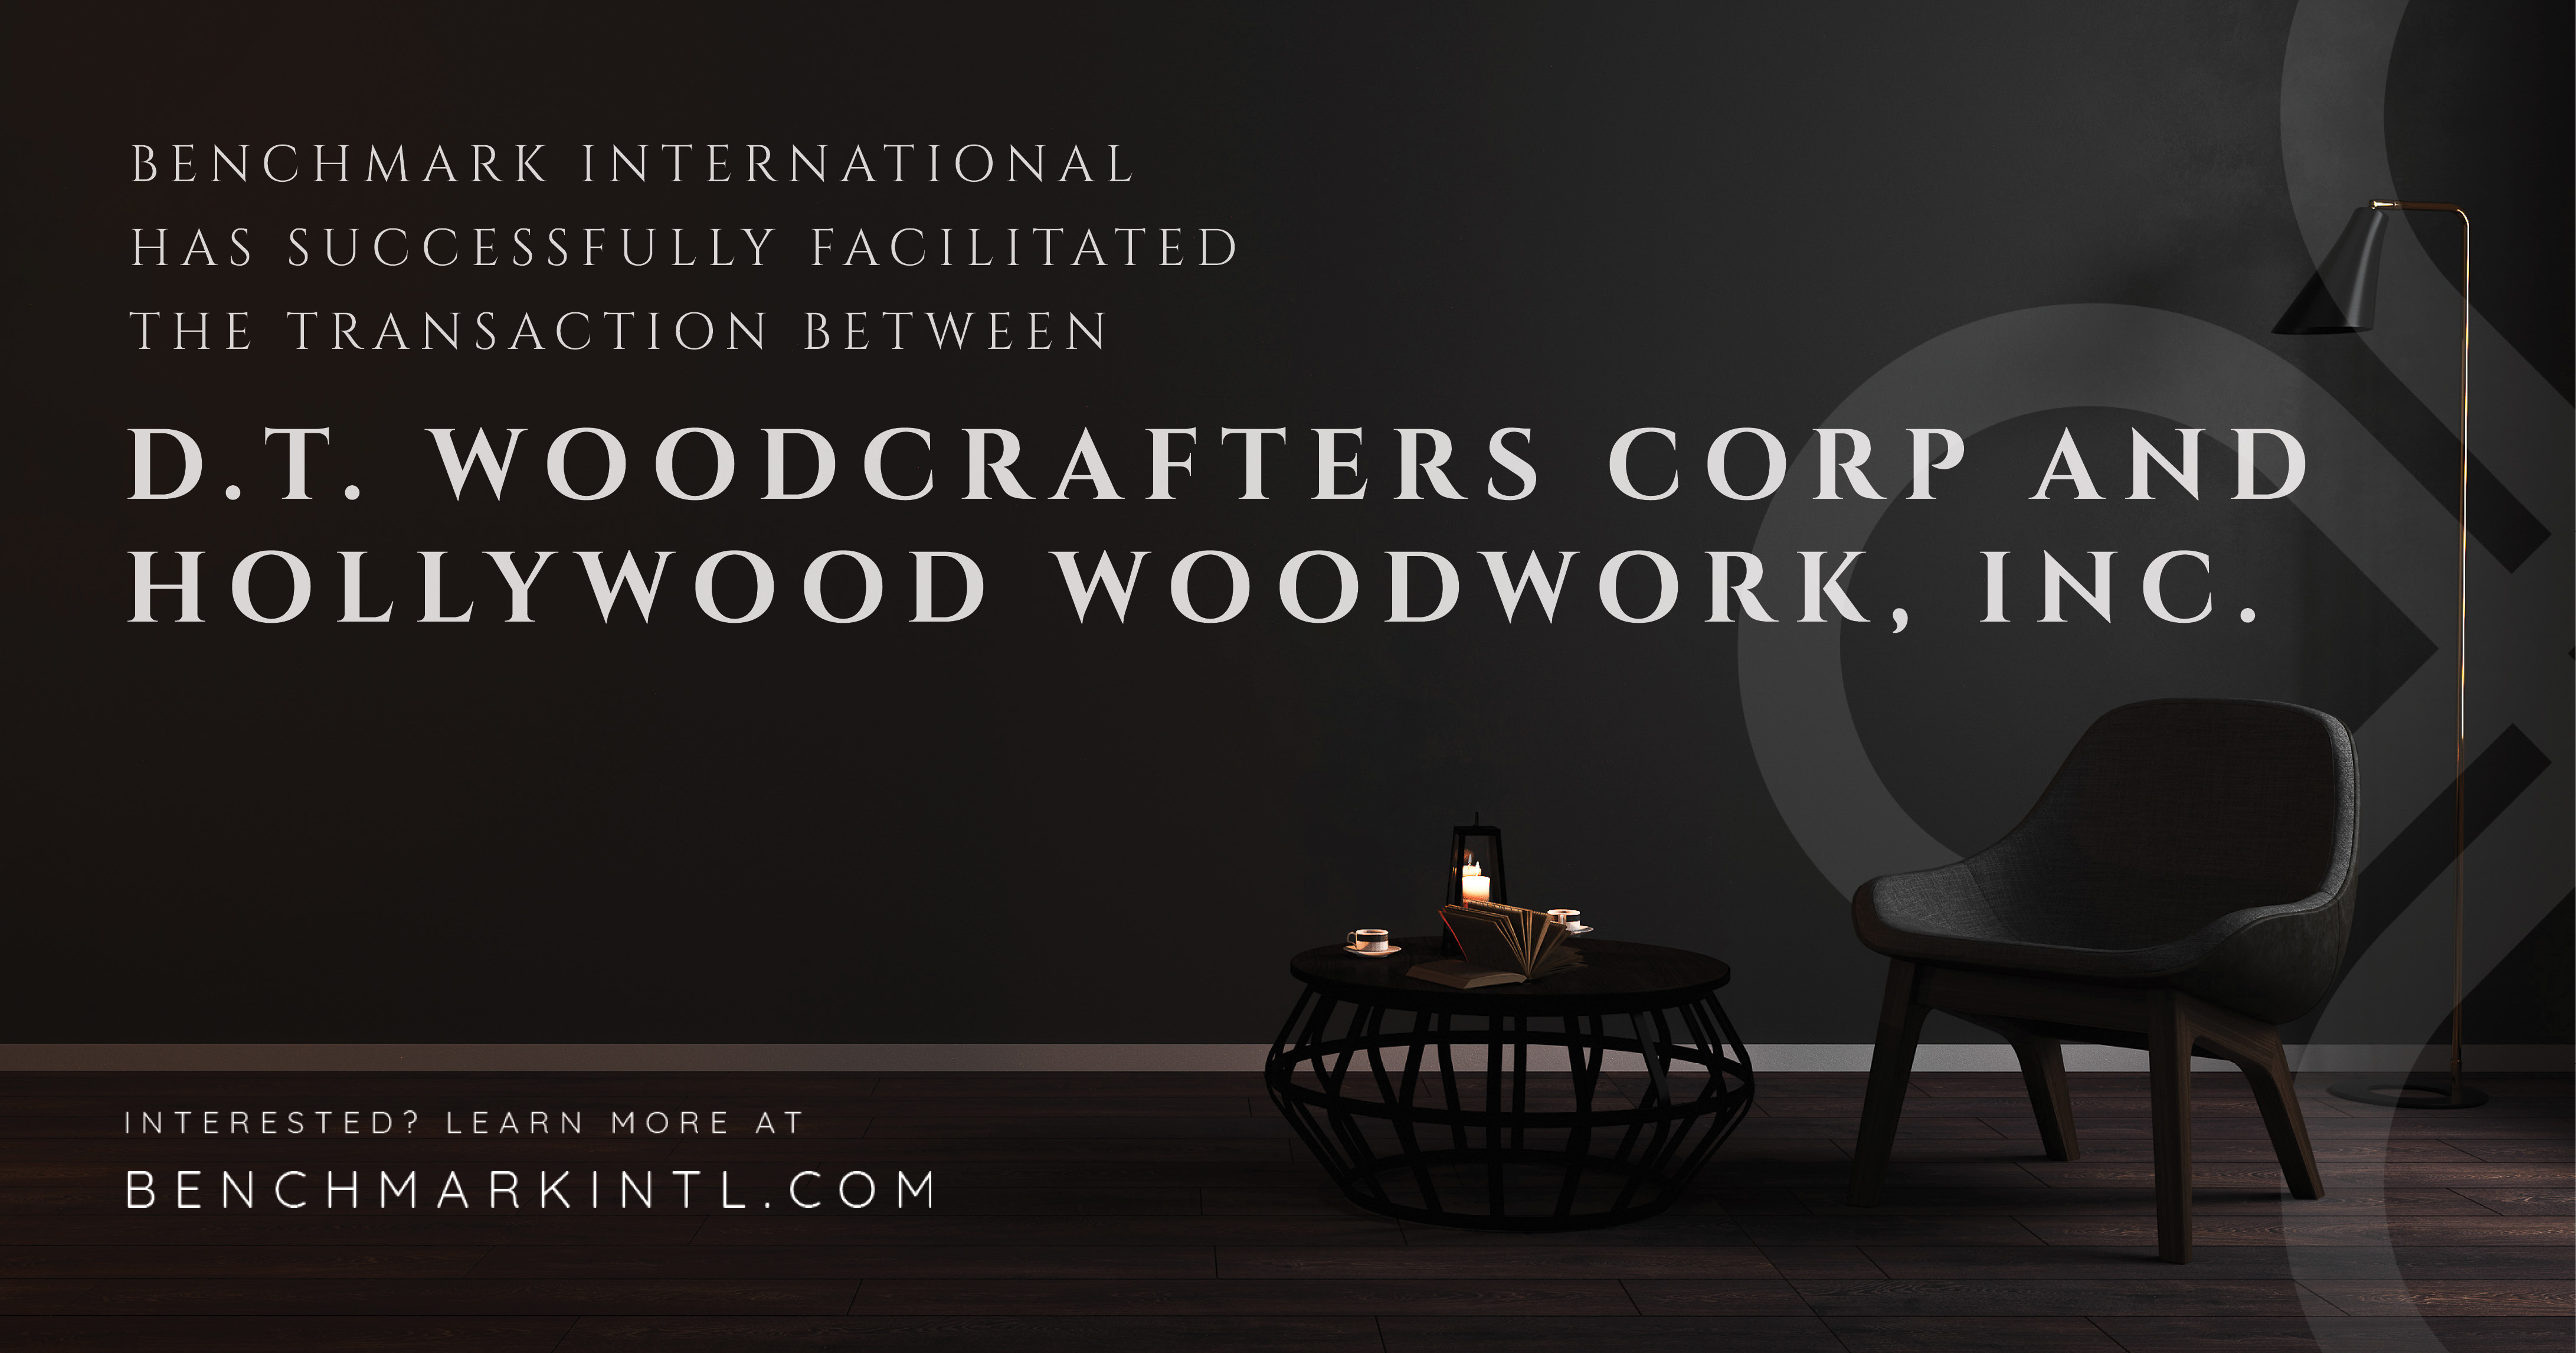 Benchmark International Successfully Facilitated A Transaction Between D.T. Woodcrafters Corp And Hollywood Woodwork, Inc.